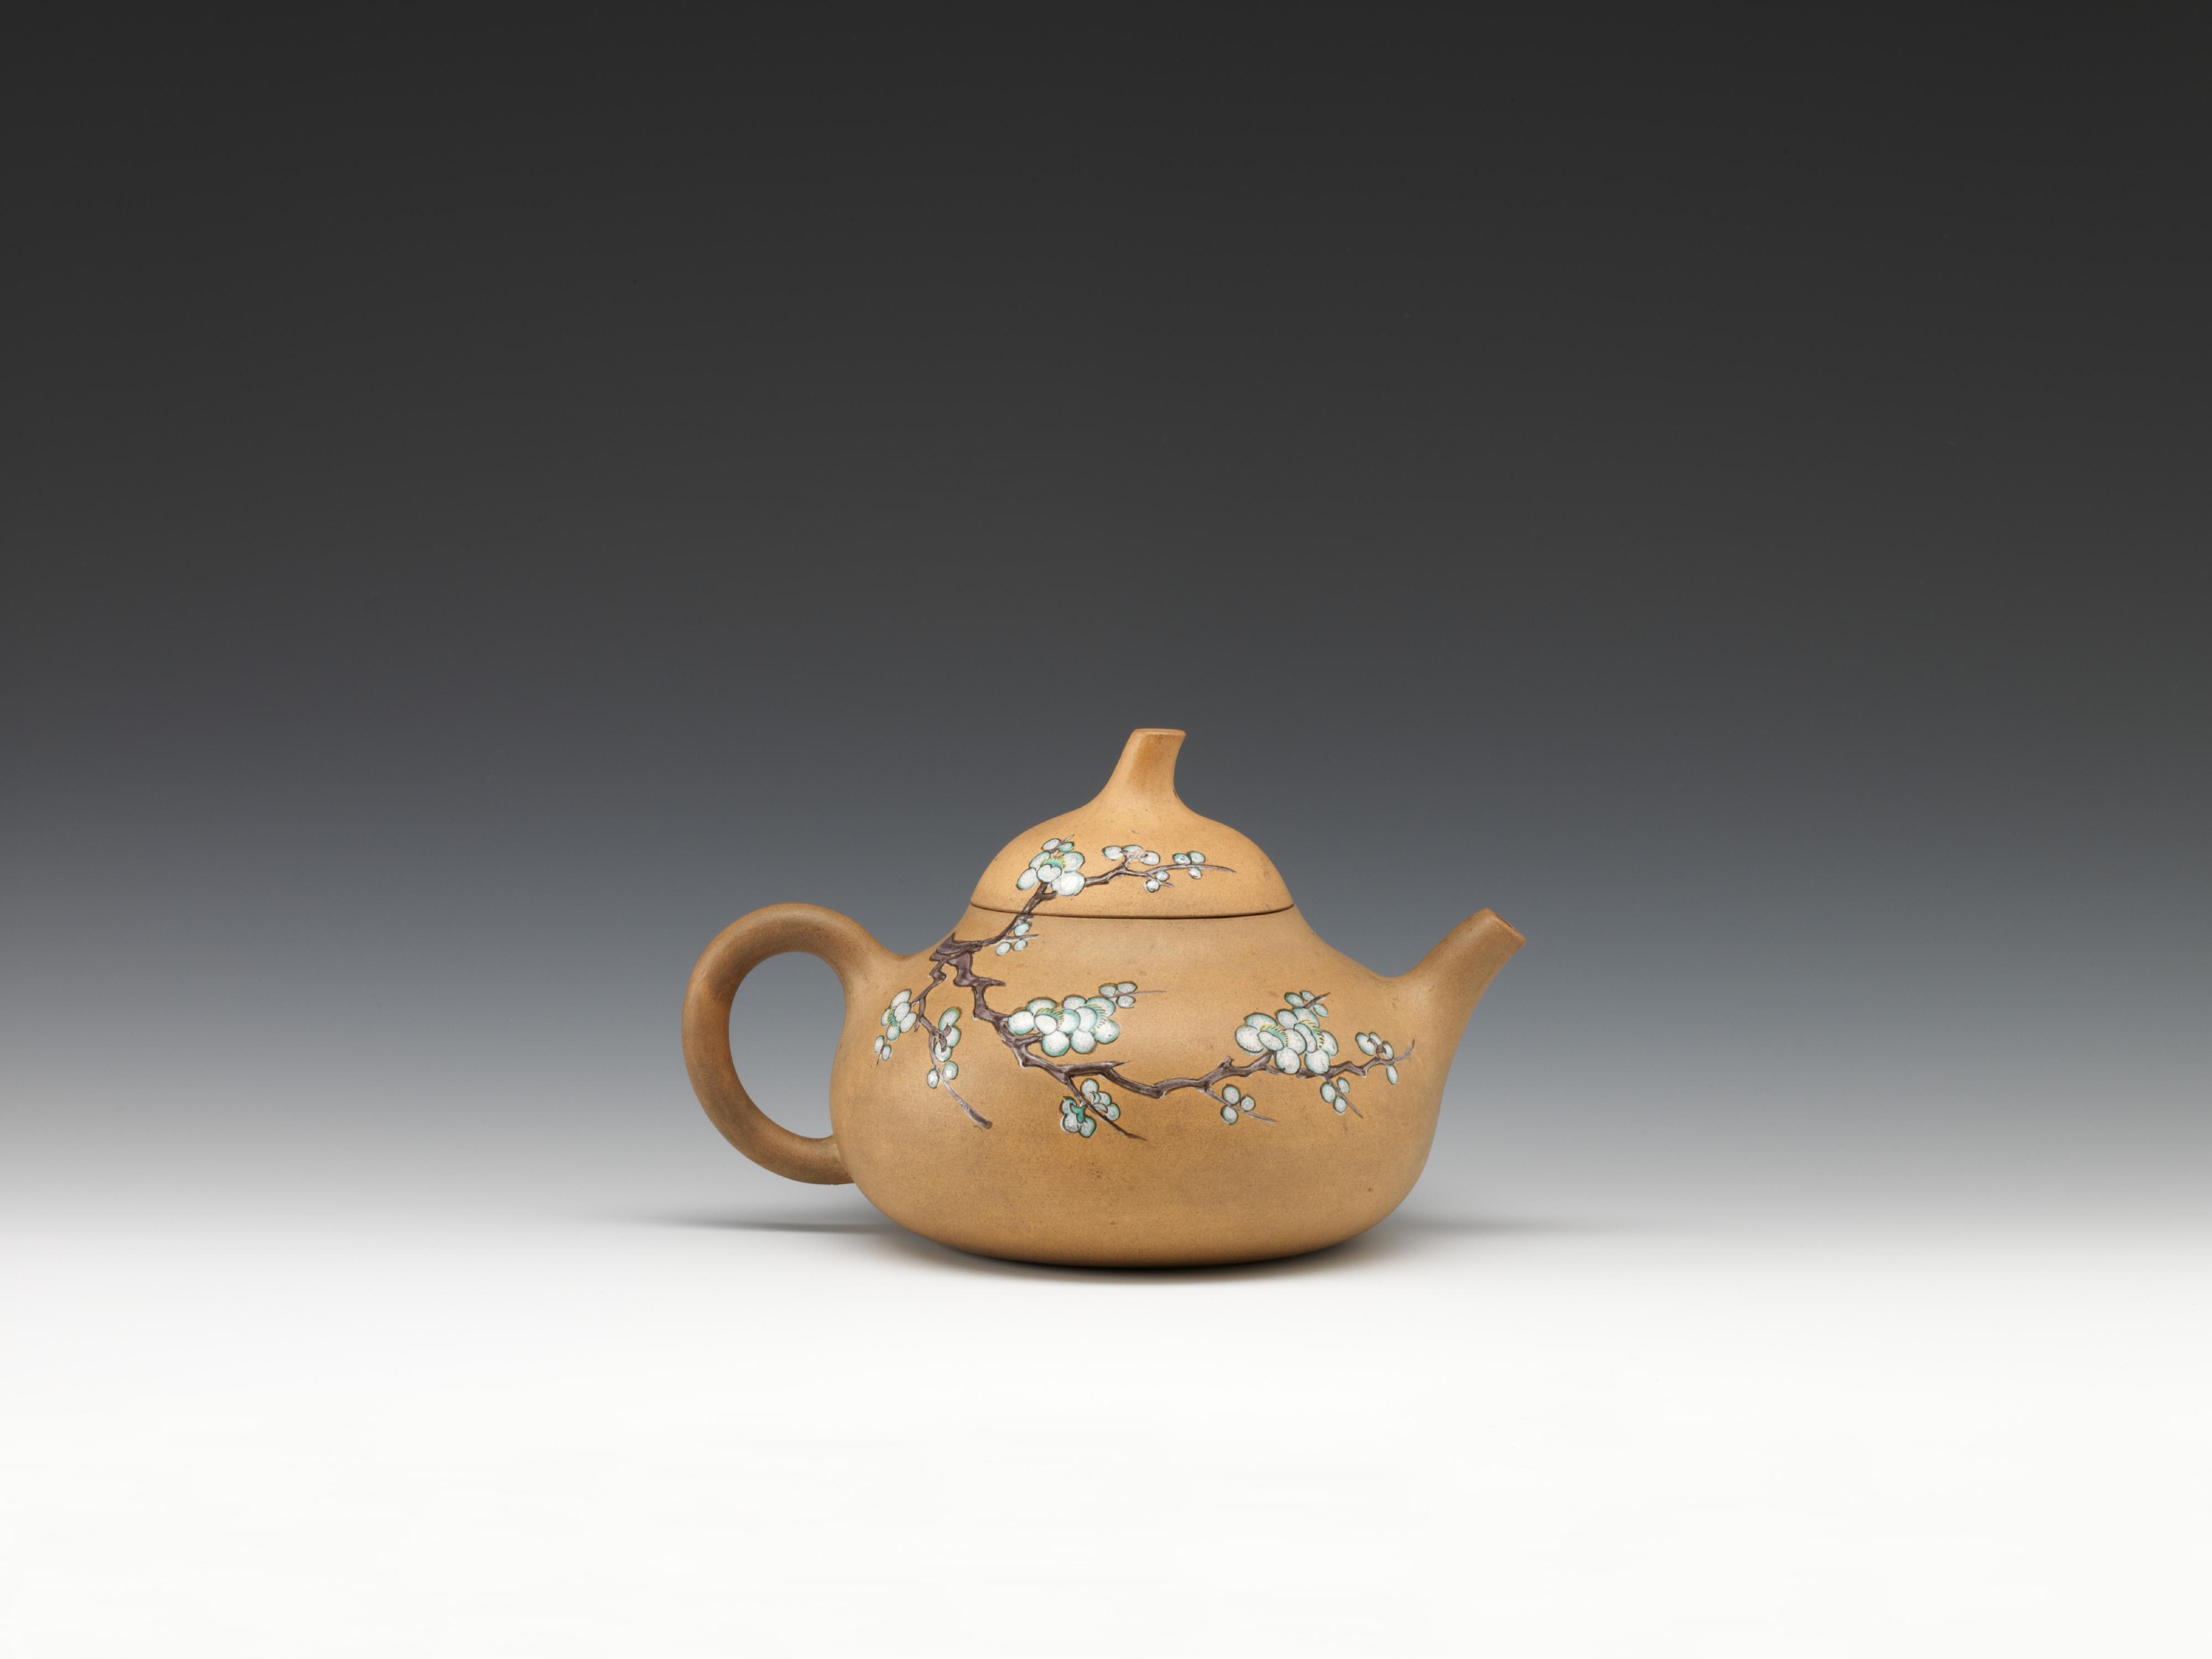 The Flagstaff House Museum of Tea Ware today (August 2) stages the exhibition "The Art of Living: Stationery and Tea Accessories of the Chinese Literati". Picture shows a teapot in gourd shape with prunus painted in famille-rose enamel created by calligrapher, painter and seal engraver Qu Yingshao from the Qing dynasty.
